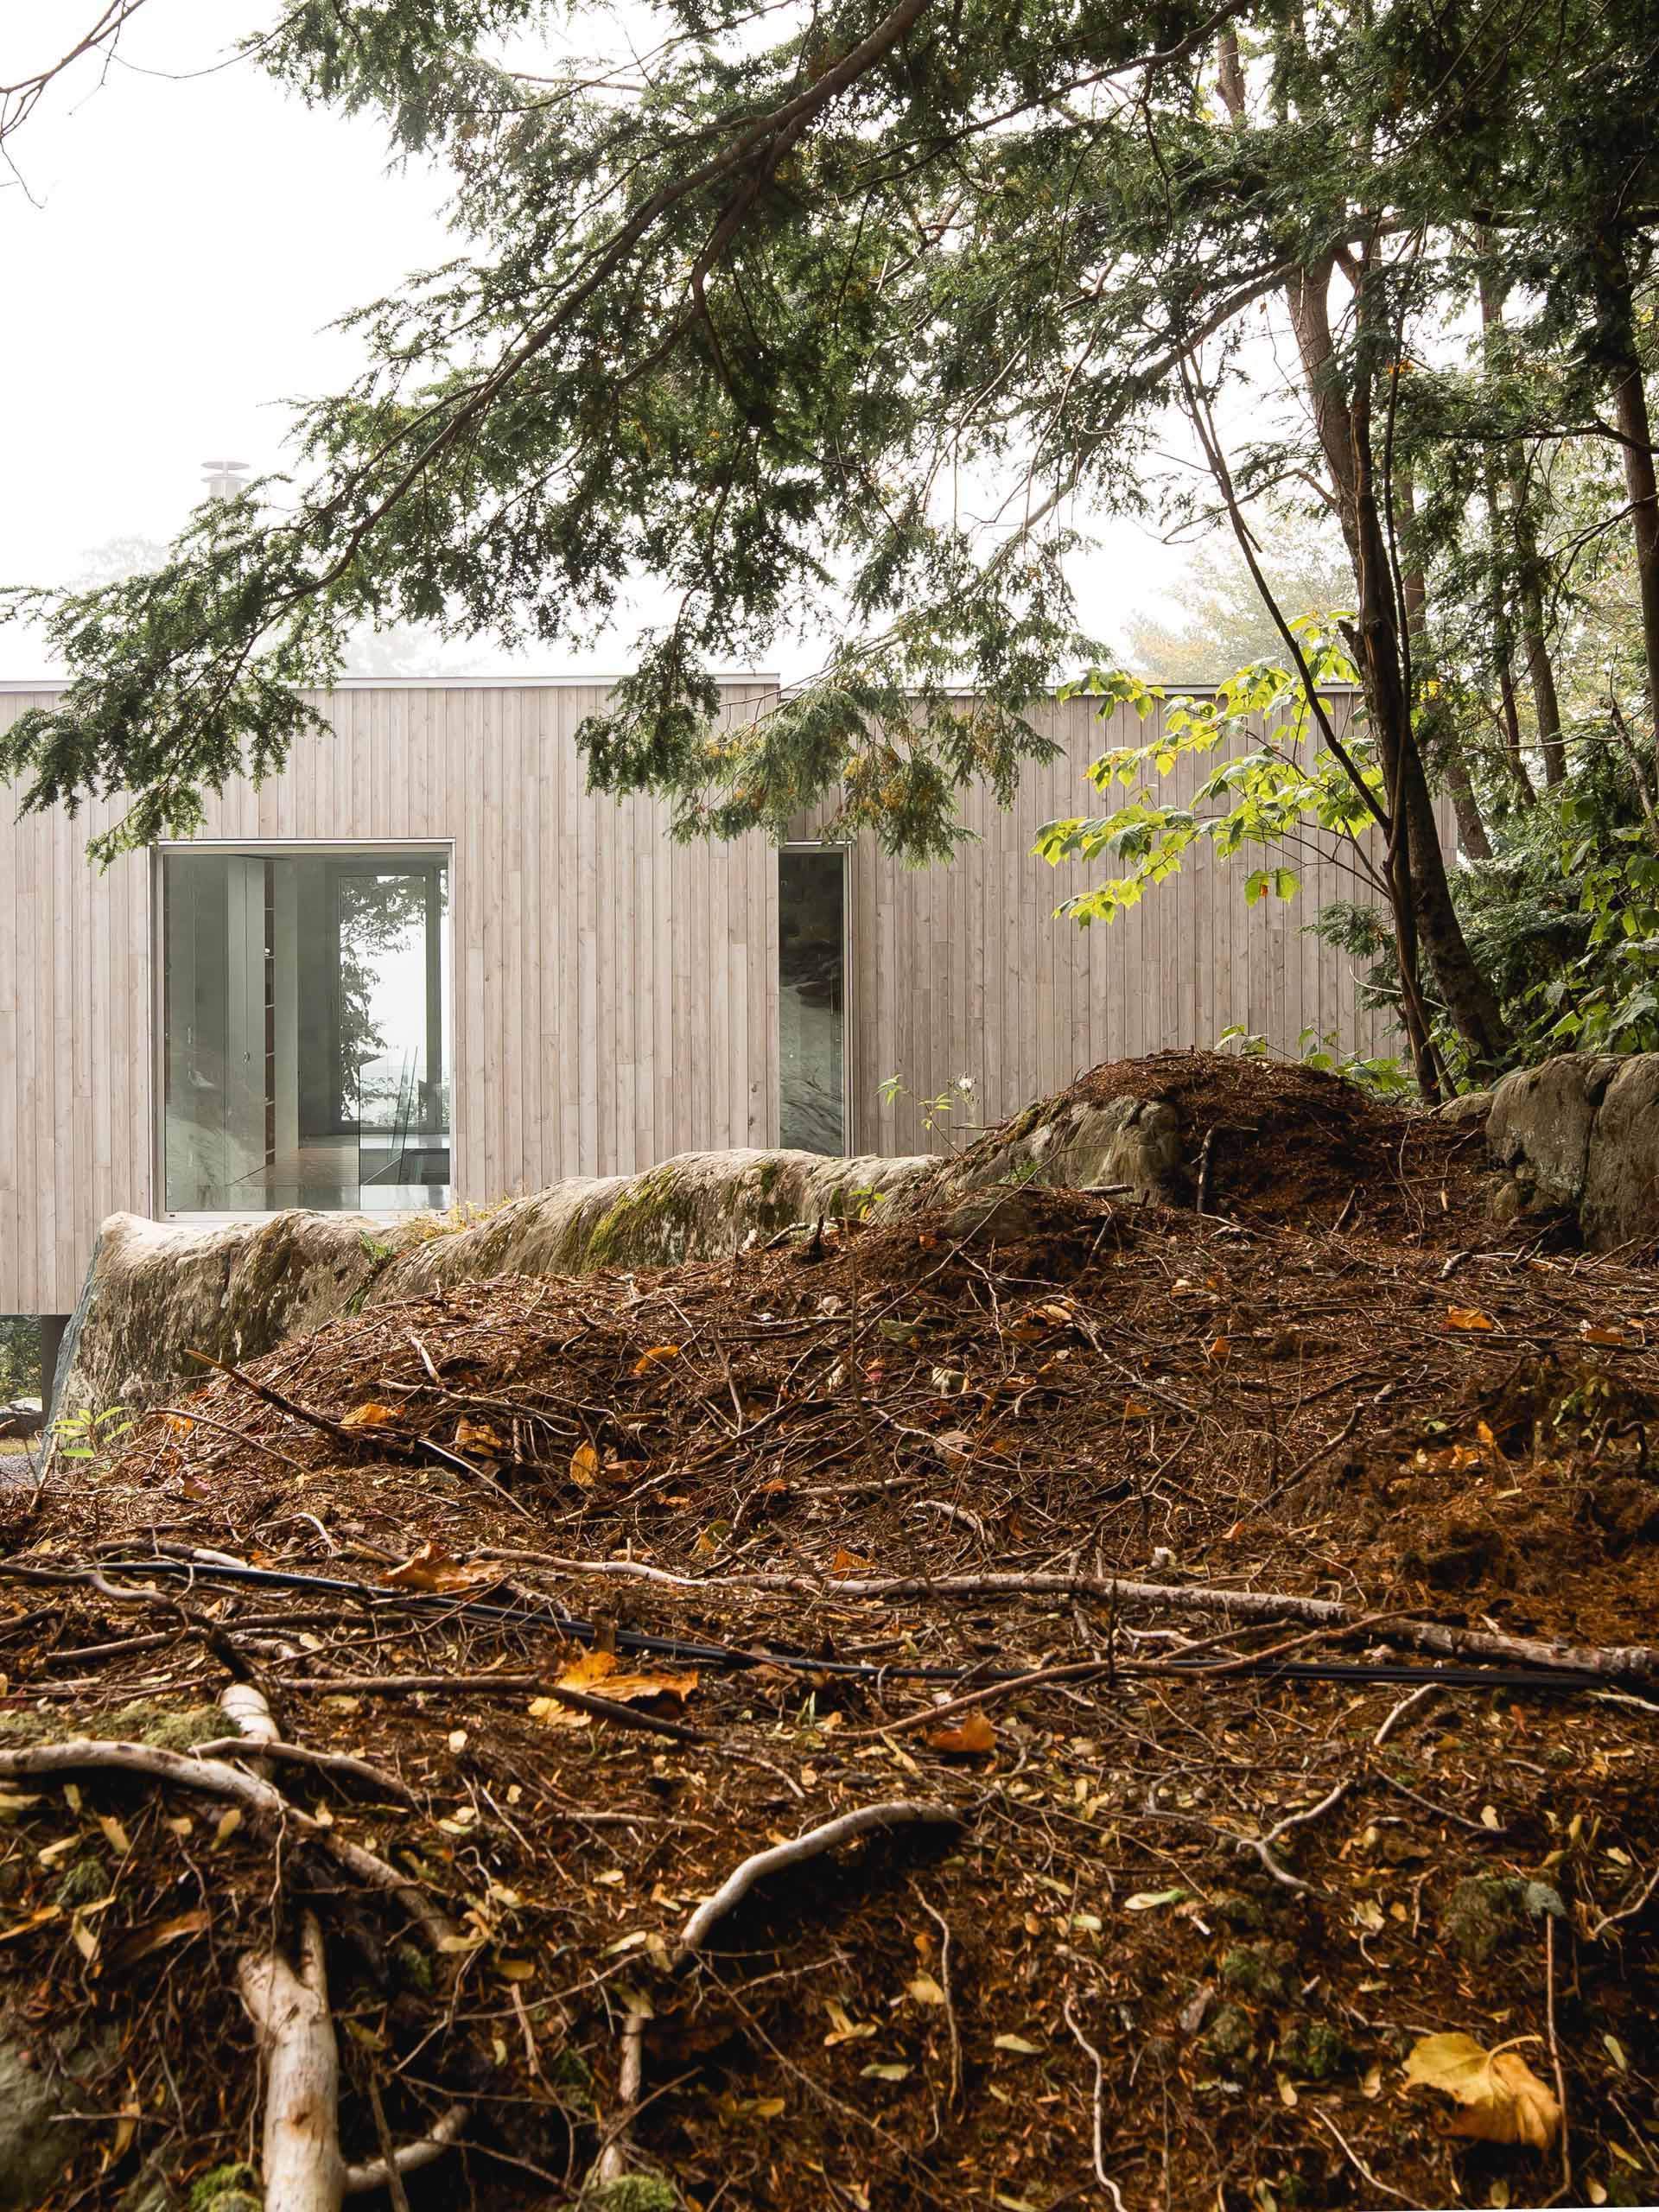 This modern house in the forest is clad in eastern white cedar, which was pretreated with a product that accelerates the greying process